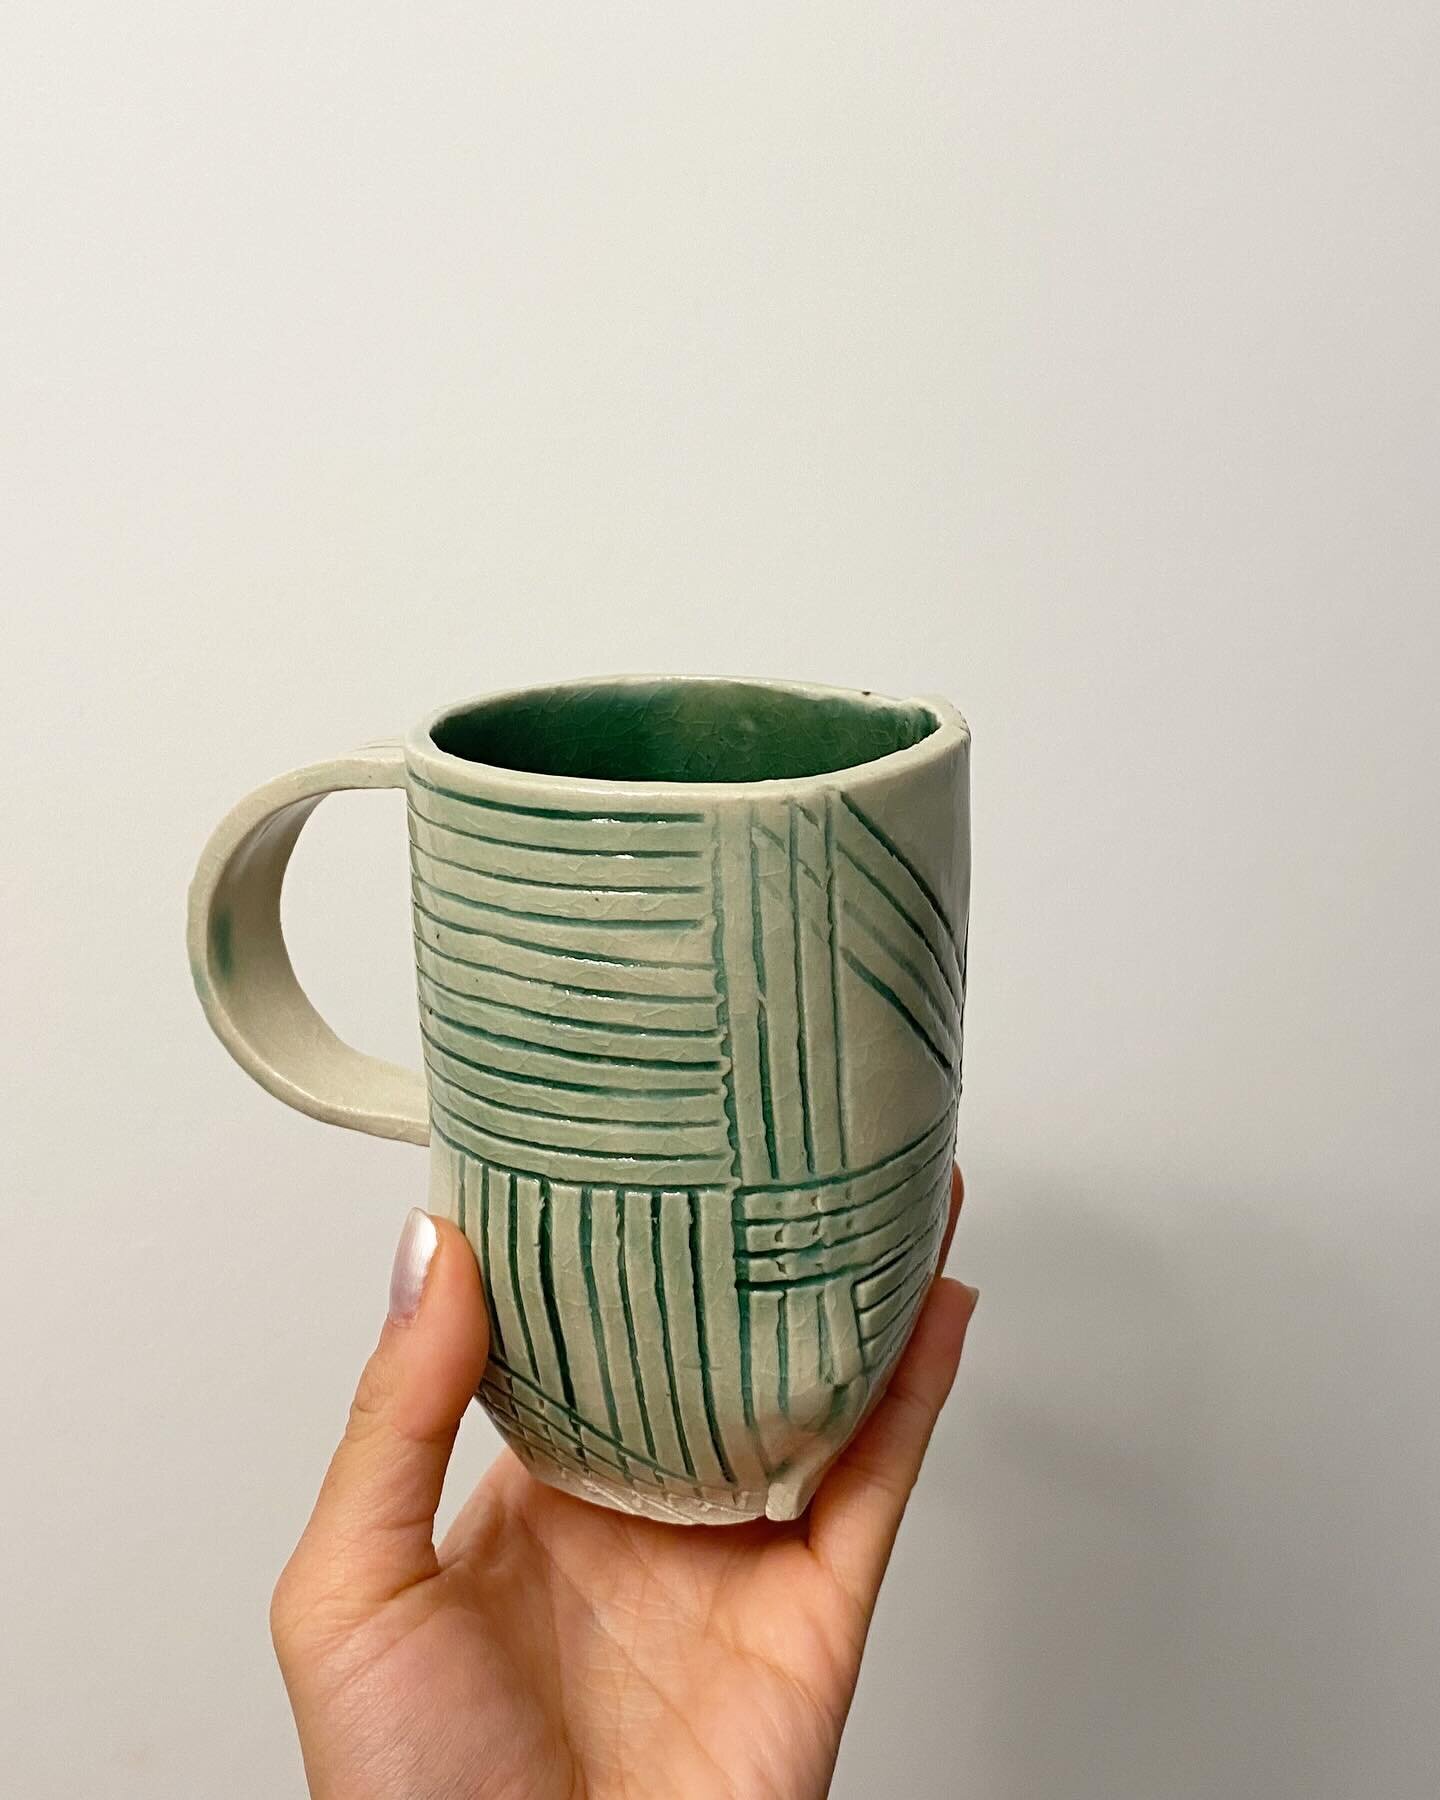 SOLD

This green beauty was a technical challenge. It was among the first few mugs I made with the origami construction technique. It was this mug that I got better with knowing when is the right dryness of slab clay to use. All the lines are hand-ca